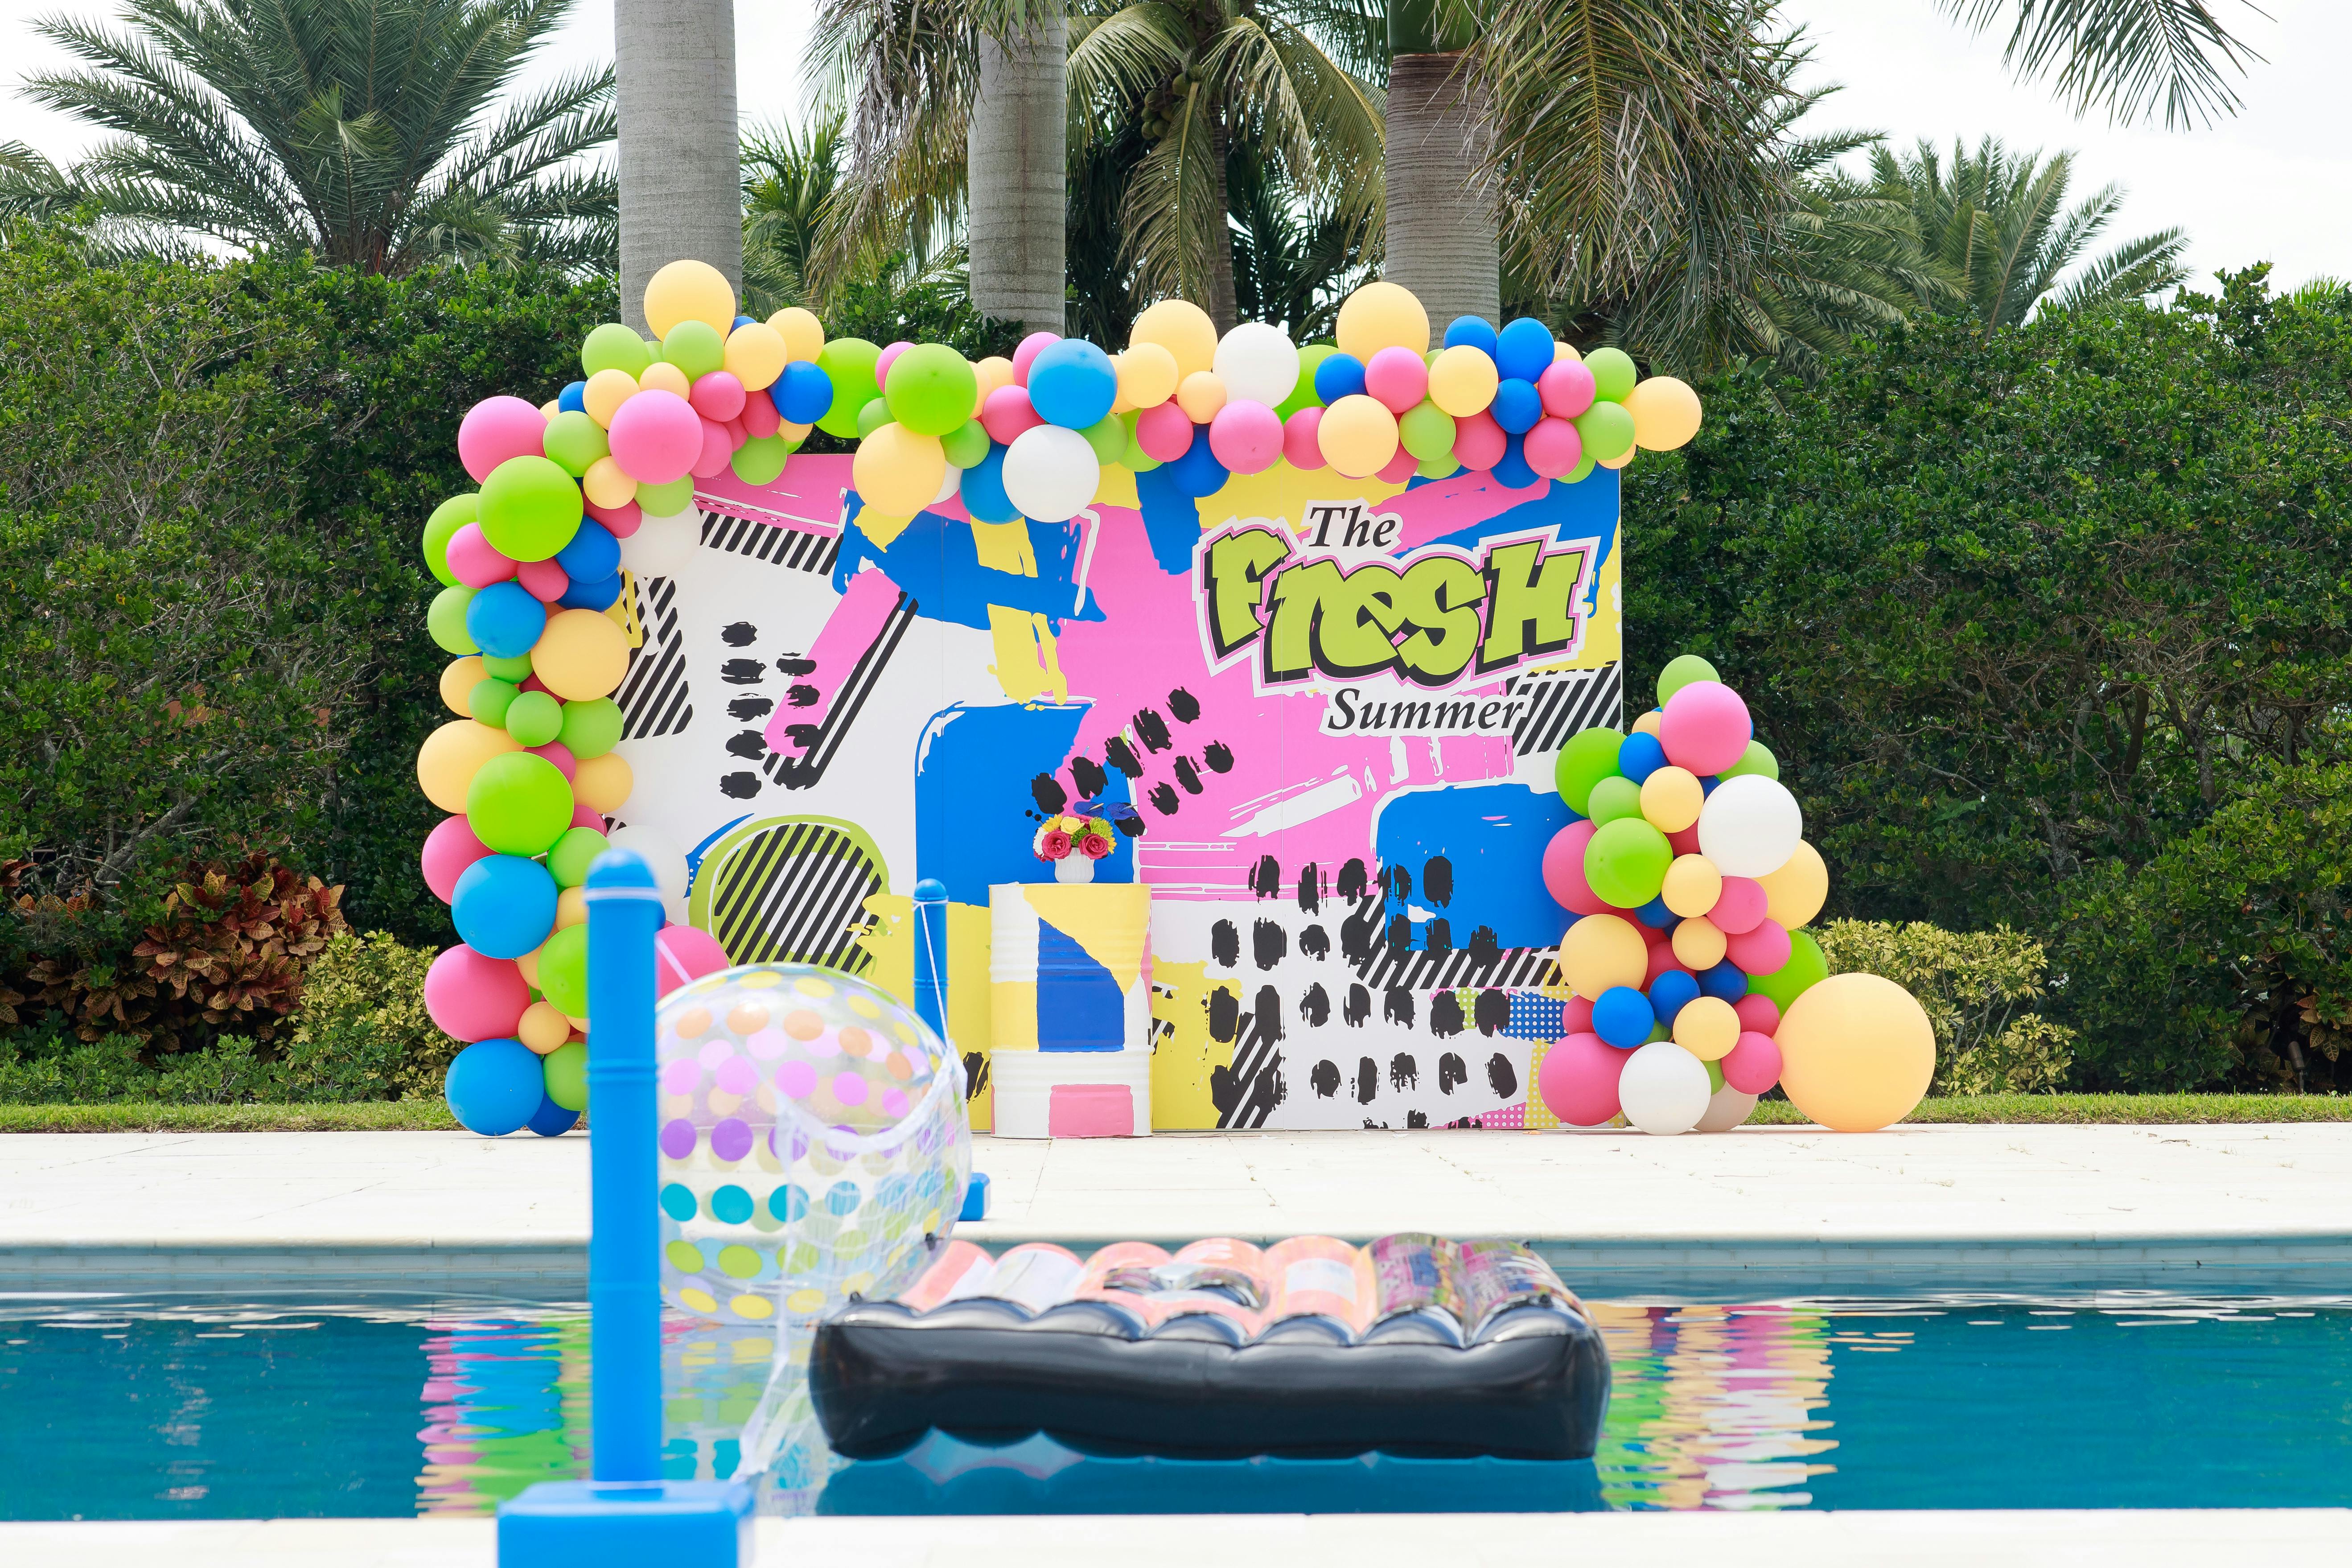 Fresh Prince of Bel-Air Themed Birthday Party at a Private Residence in Miami, FL